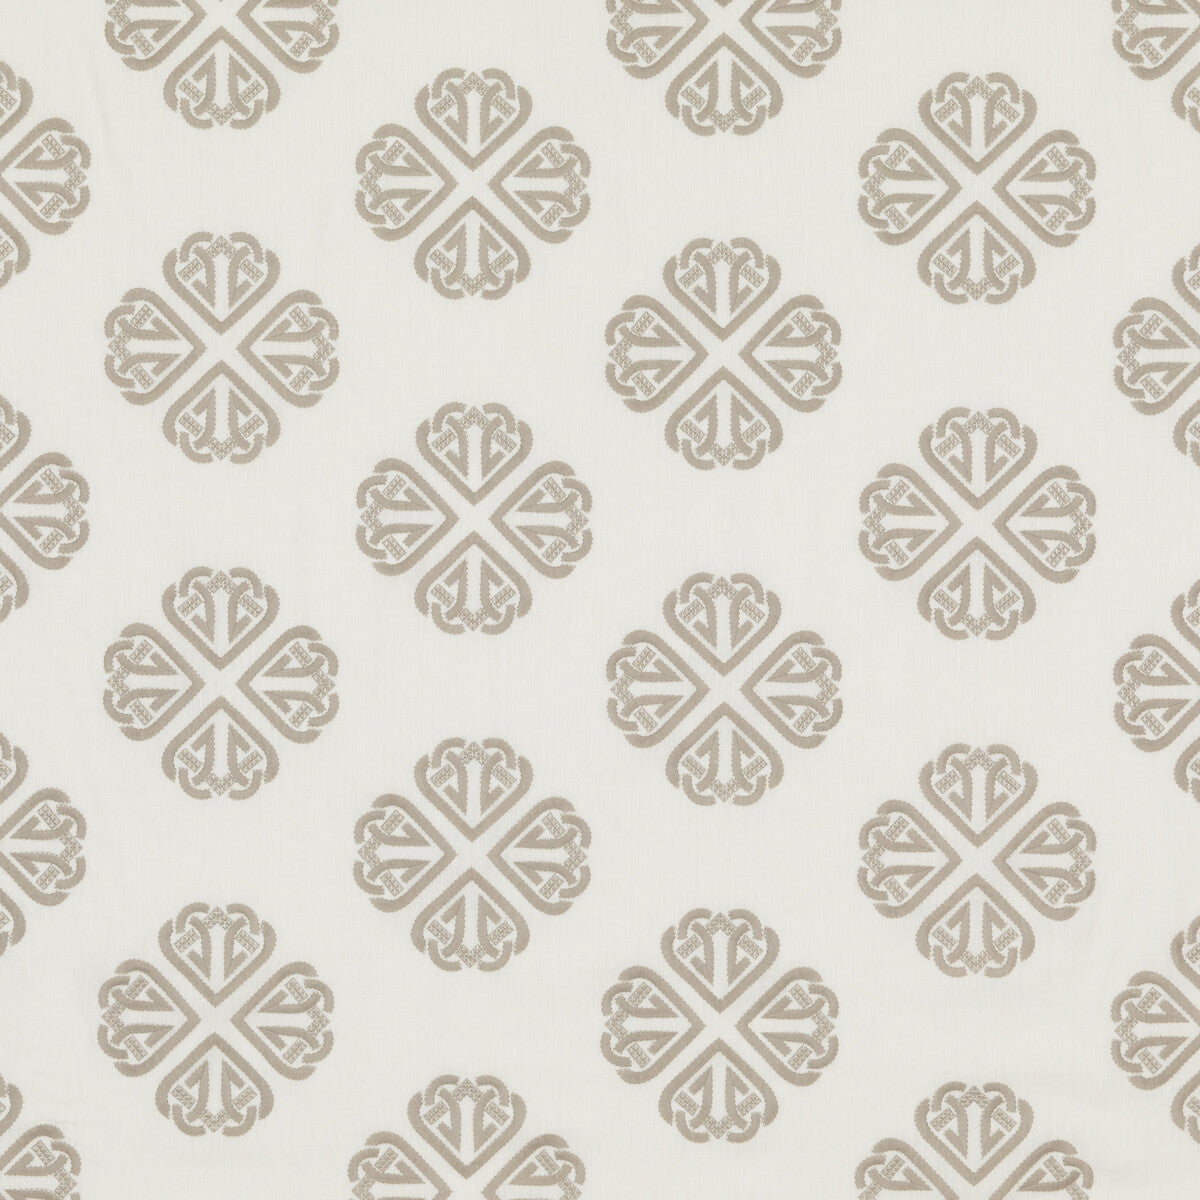 Kersloe fabric in ivory/stone color - pattern BF10768.1.0 - by G P &amp; J Baker in the Keswick Embroideries collection